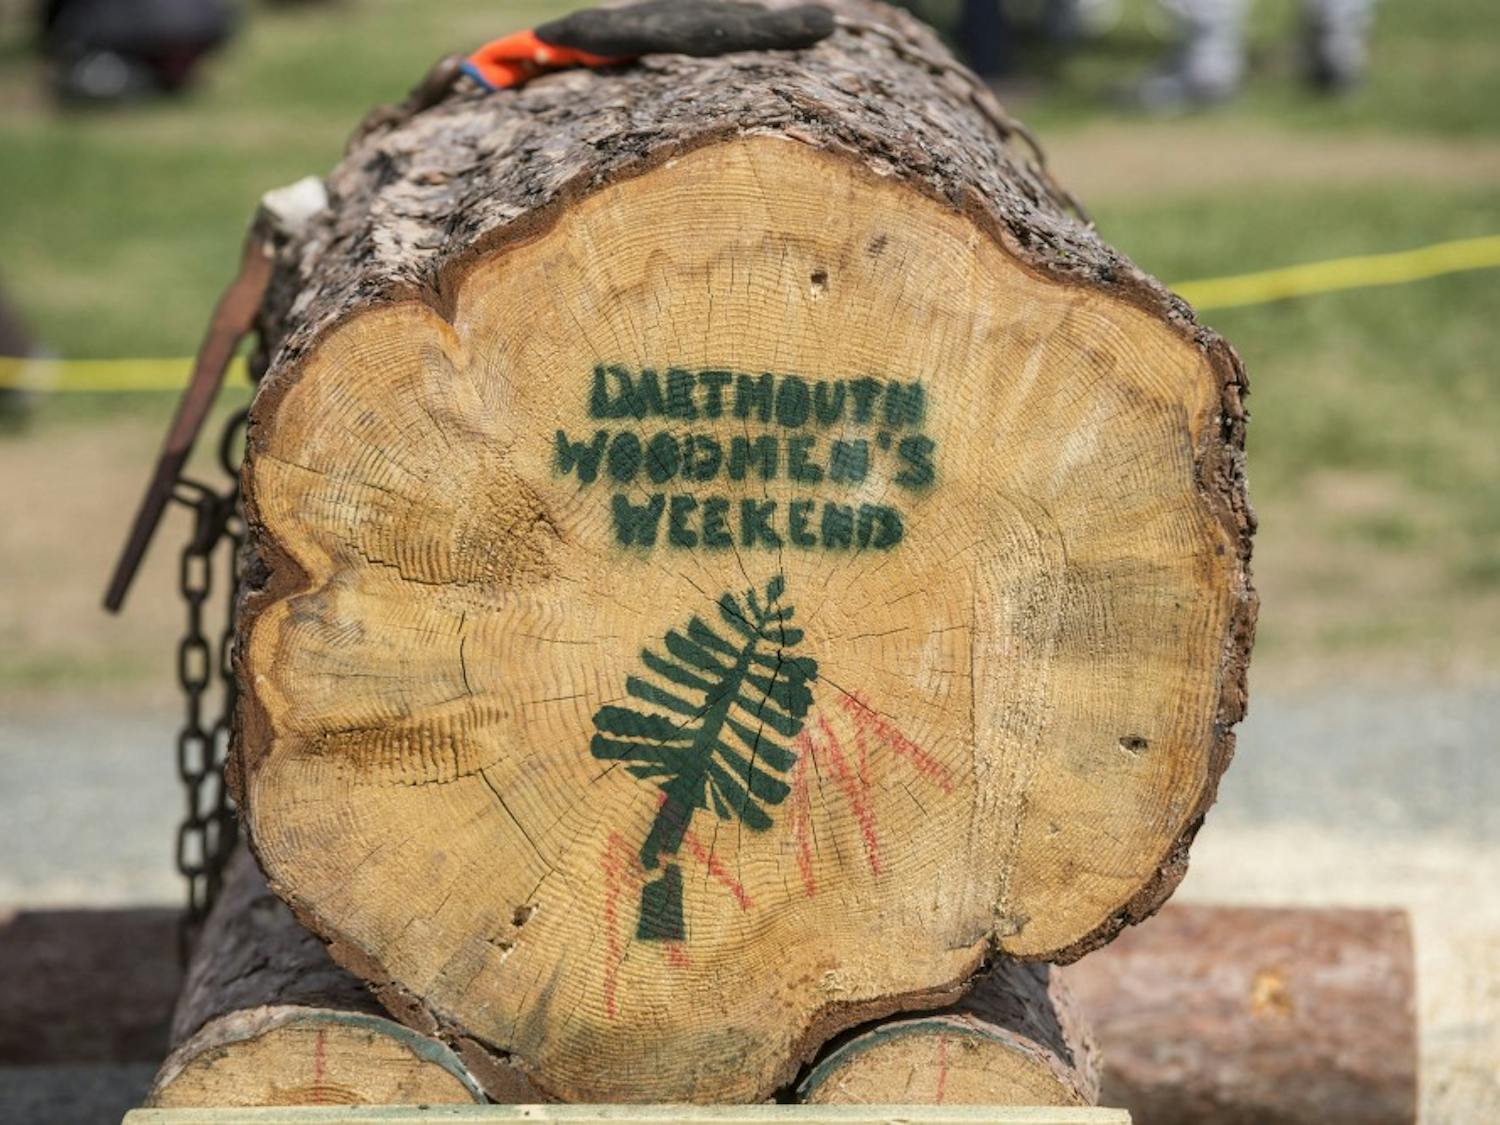 The Dartmouth Woodsmen's Team practices events such as axe throwing and wood splitting.